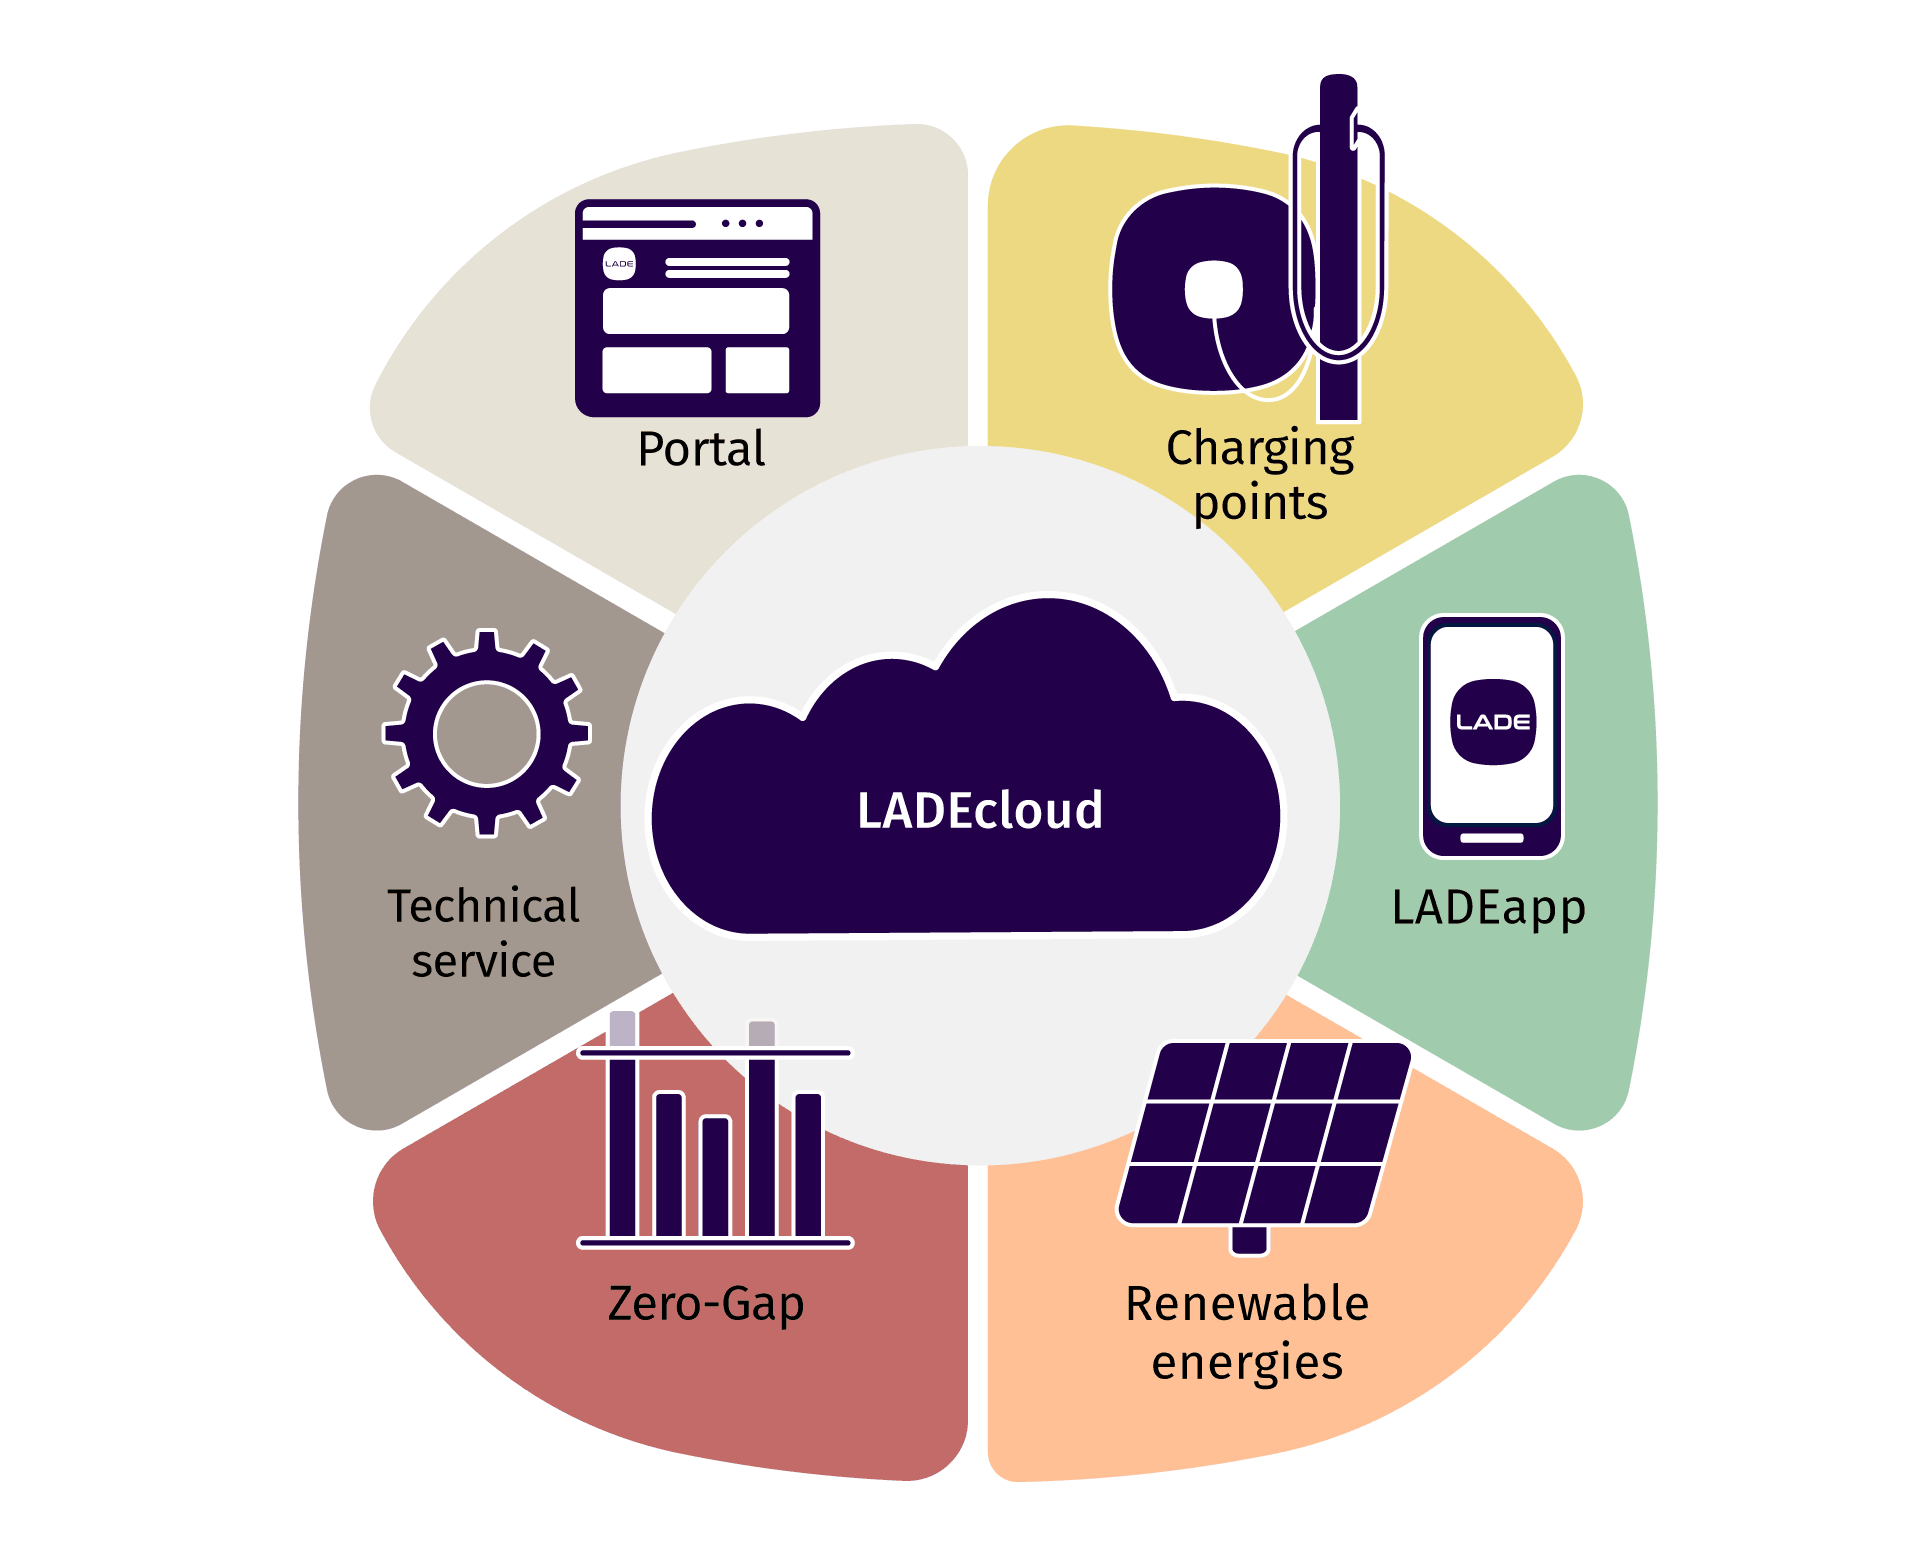 Infographic about the different offers of the LADEcloud: LADEapp, with renewable energies, zero-gap load balancing, technical service, portal